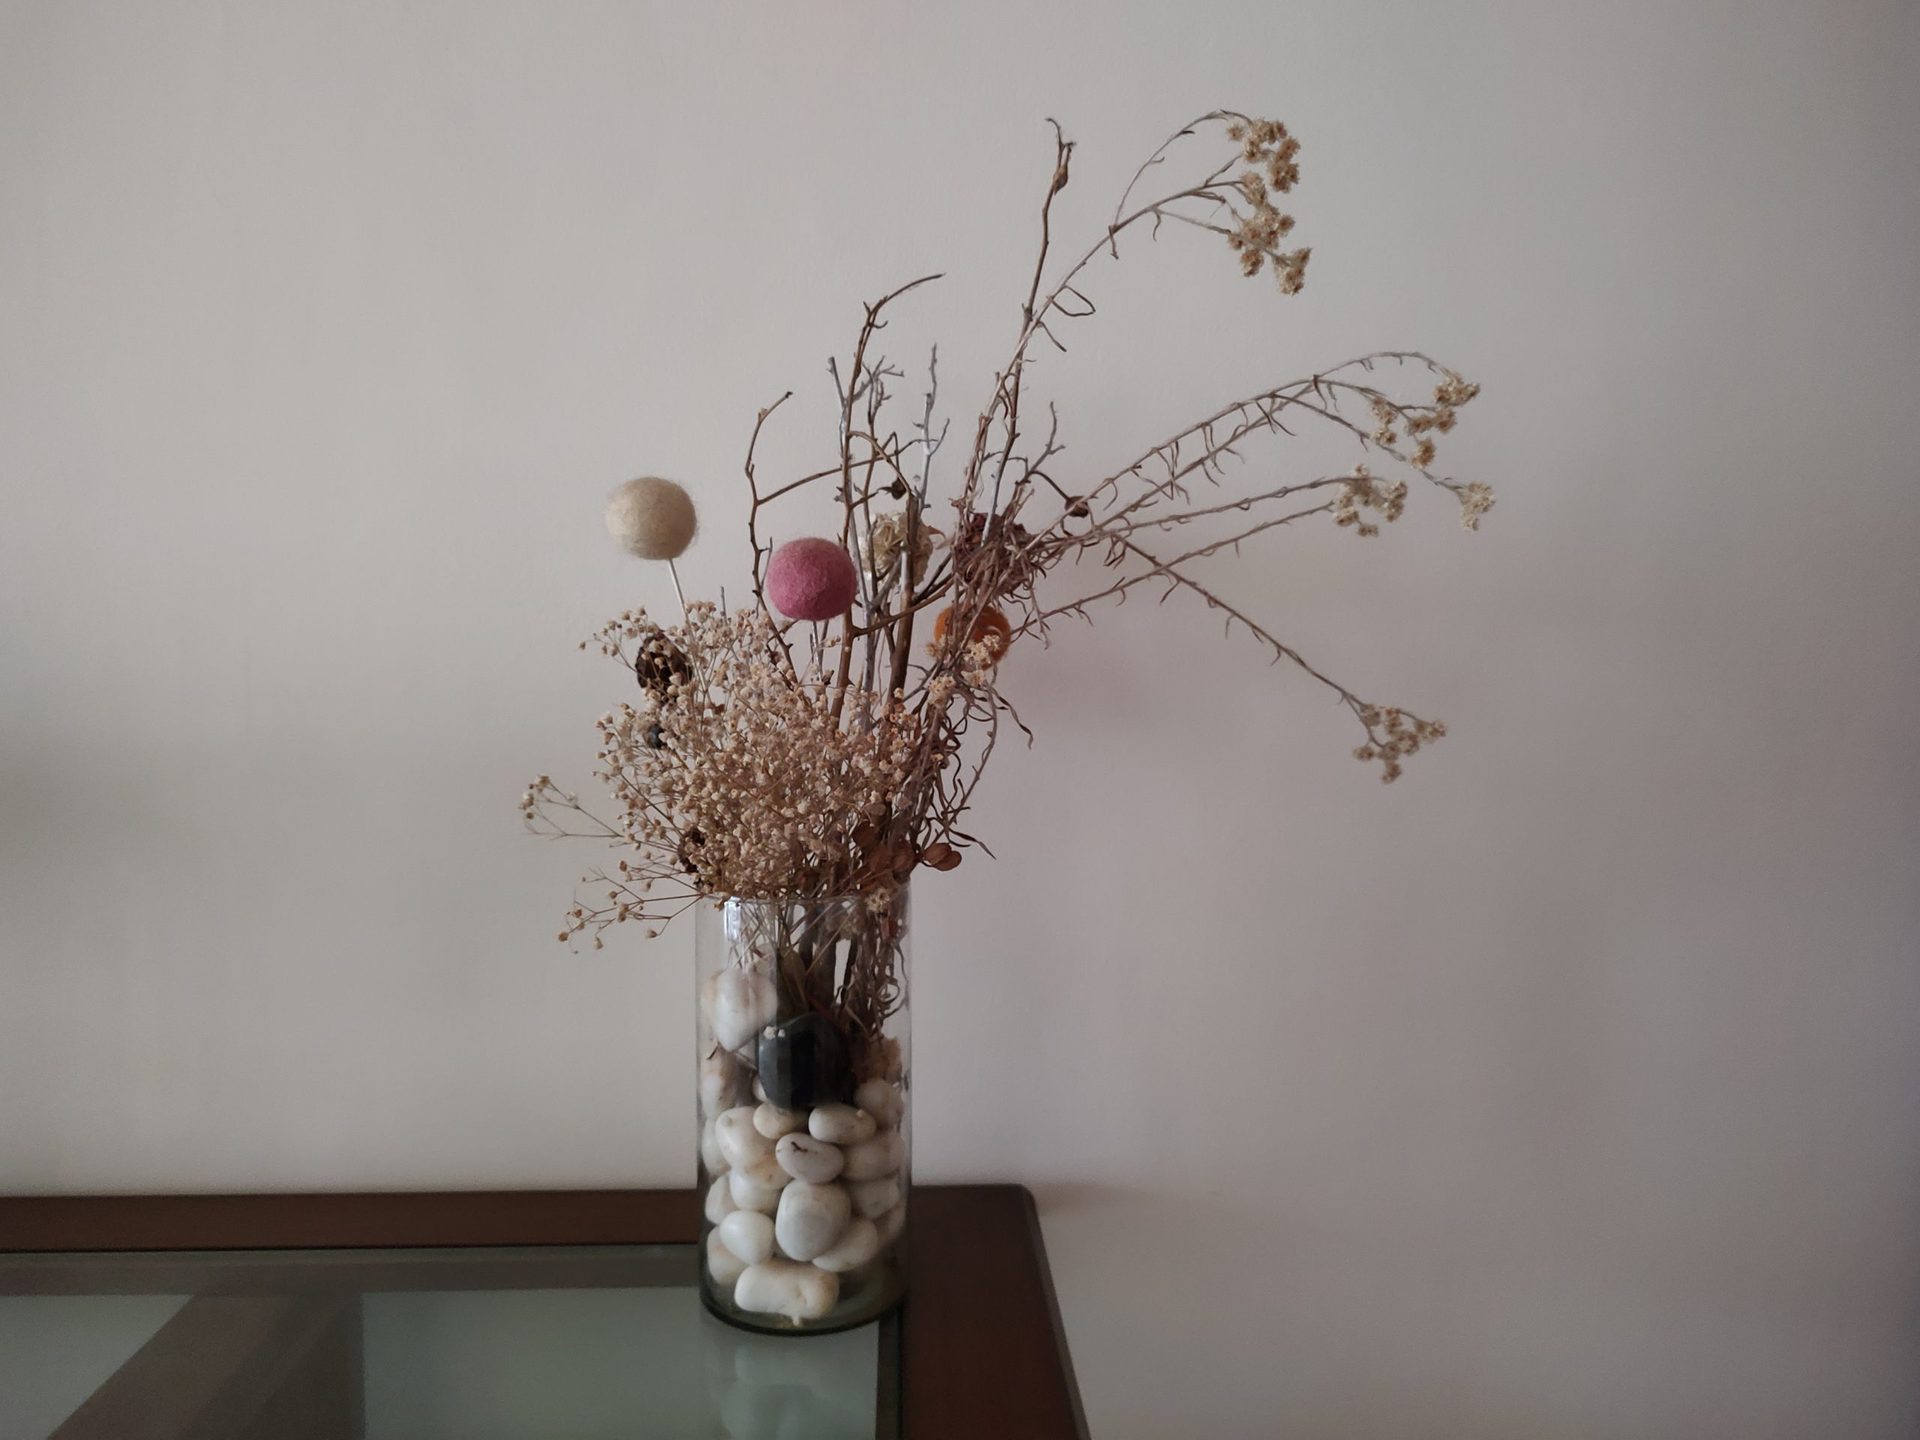 Moto Edge 20 Pro indoor low light shot of dried flowers in a vase on a table